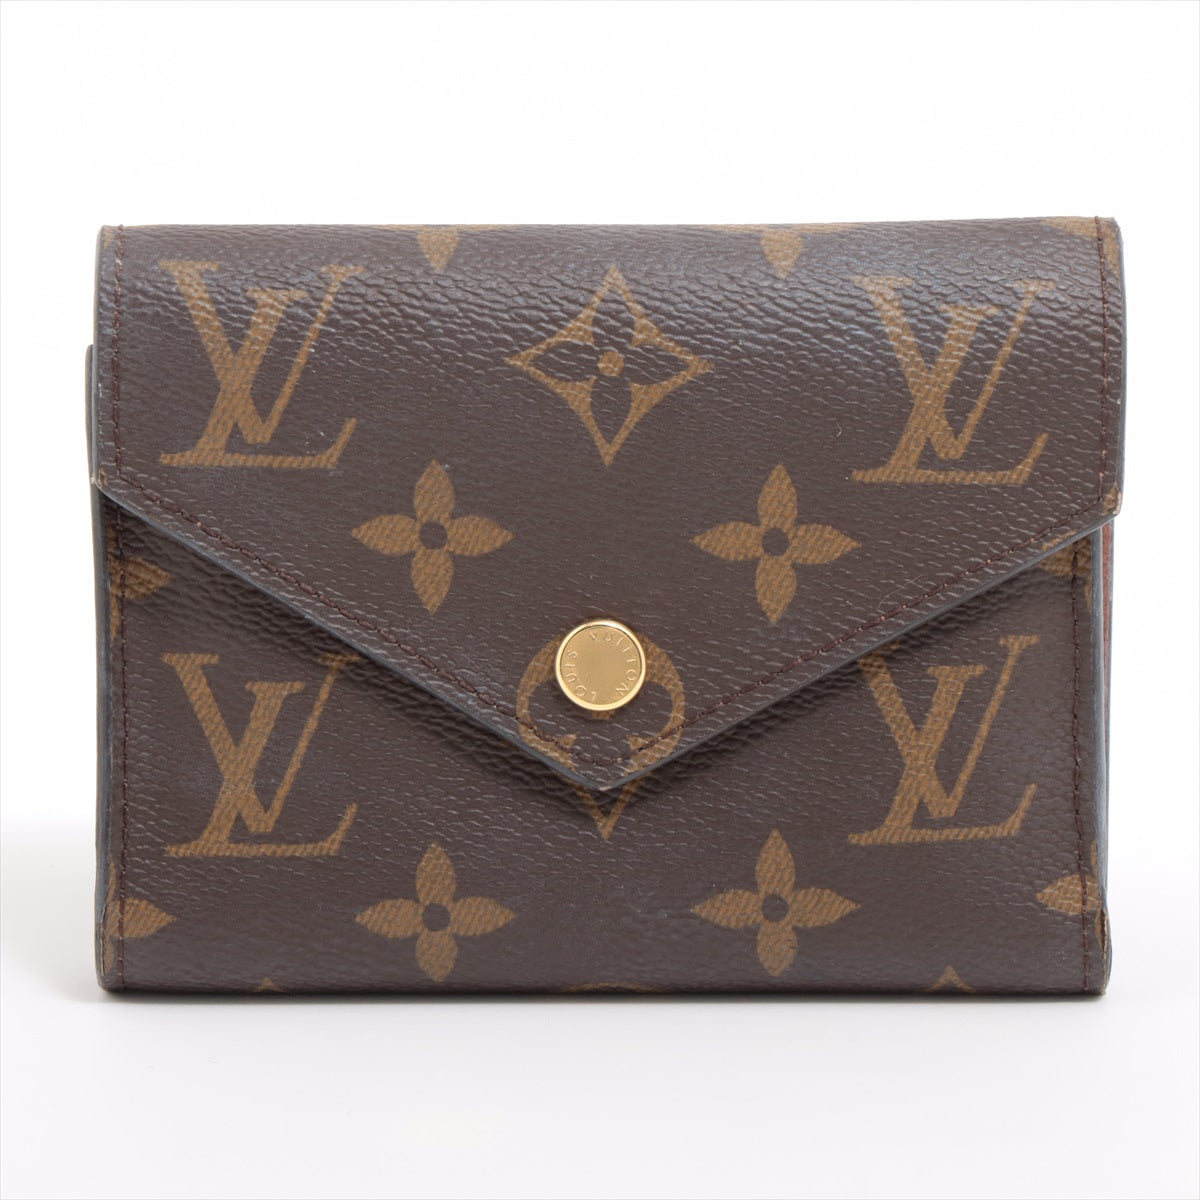 Louis Vuitton Monogram Portefeuille Victorine M62472 There was an RFID response